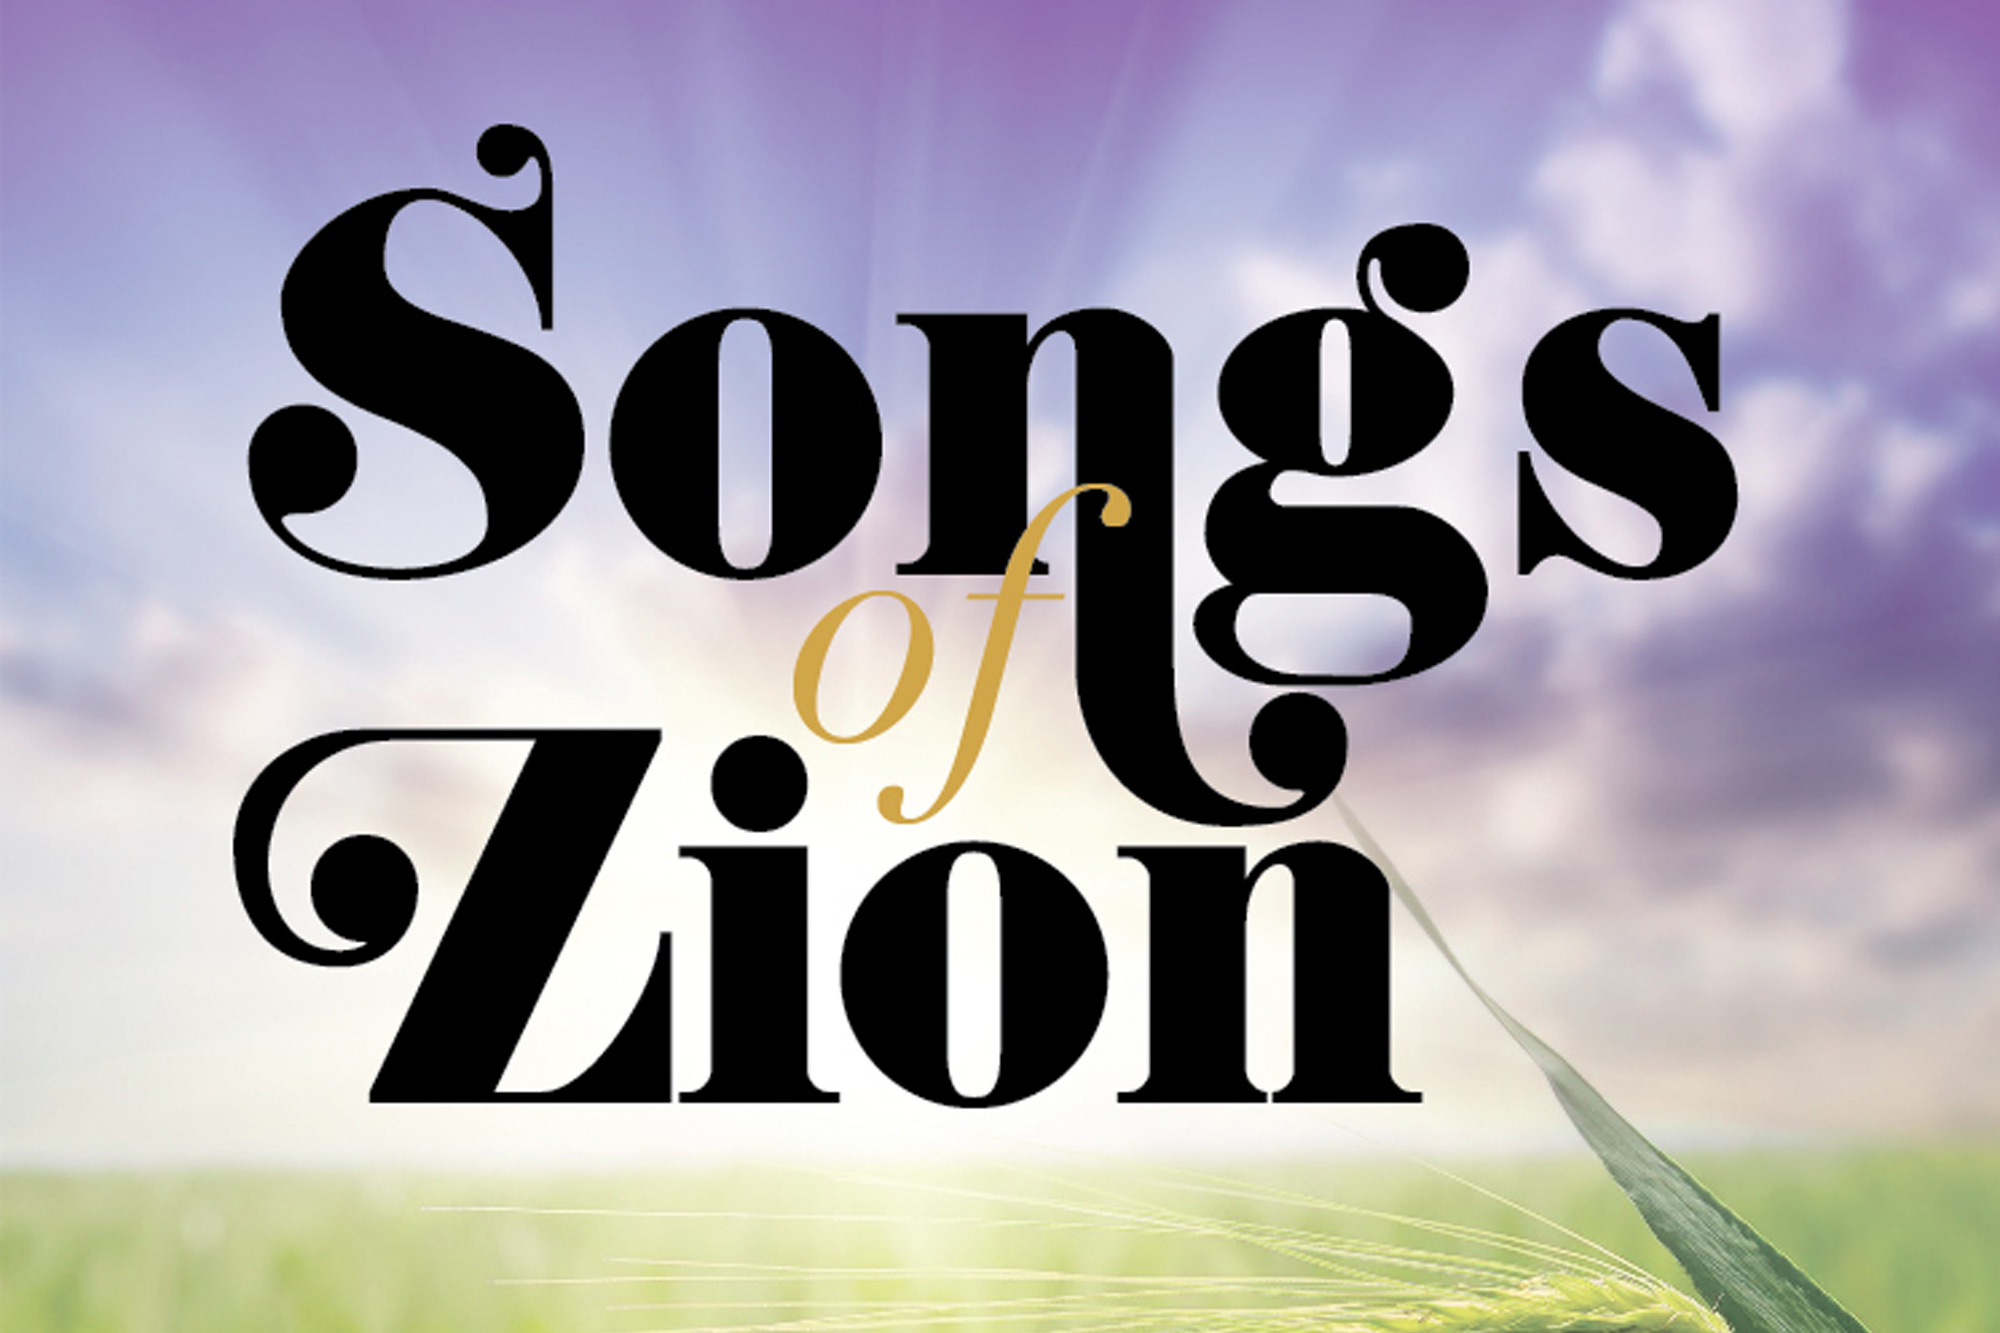 Songs of Zion Soundtrack